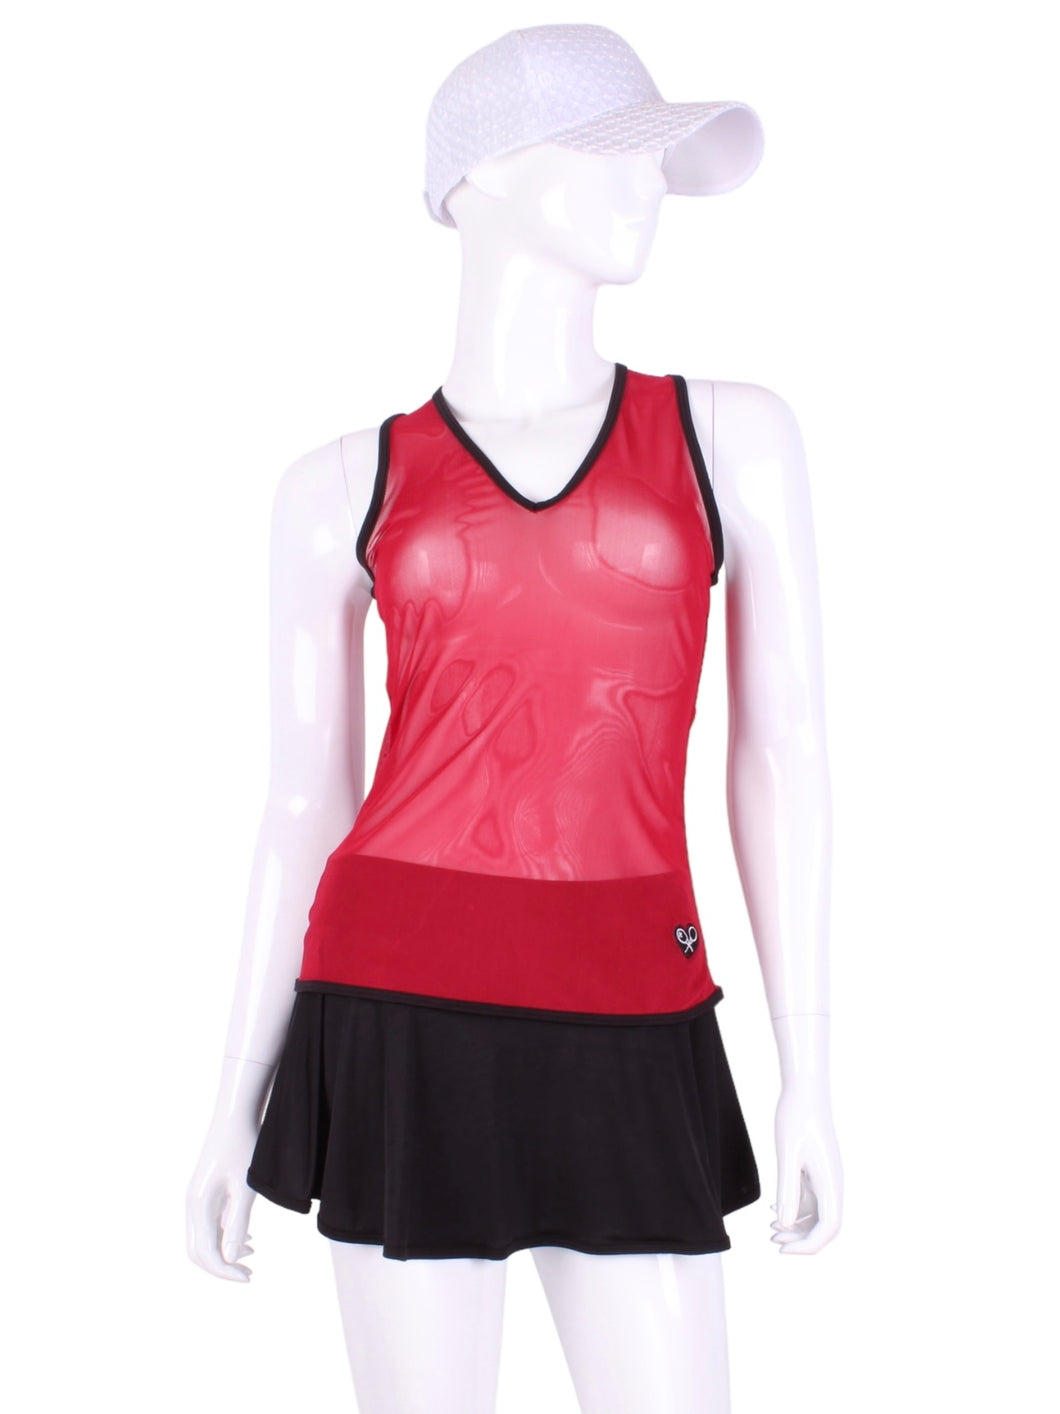 Red Mesh Vee Tank Straight Back with Black Trim. An elegant tennis tank top - silky soft Mesh - light - and quick drying breathable fabric.  Vee front and tee back with two needle cover stitch at each seam.  Smooth binding finishes the edges with class.  The most comfortable and feminine tennis top.